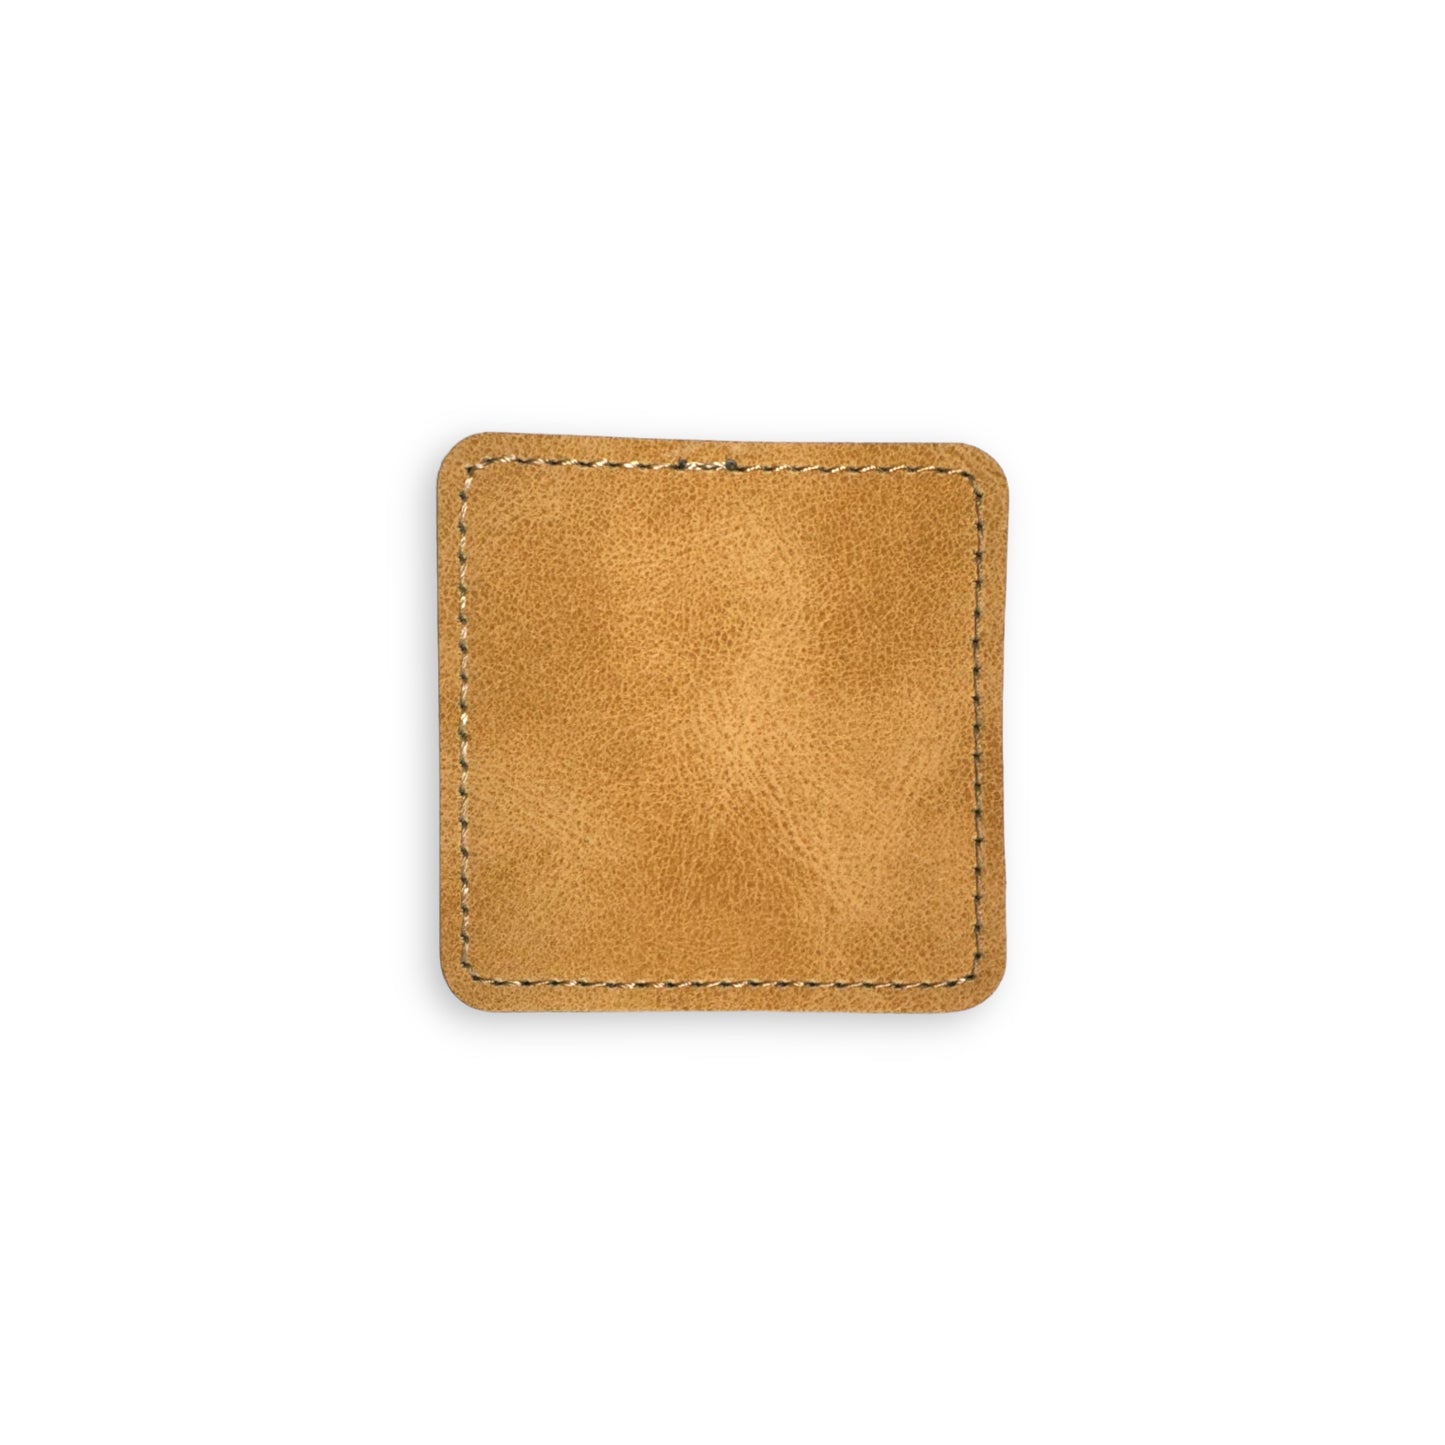 Highland Leatherette Stitched Patch Blanks w/ Hydbond Adhesive